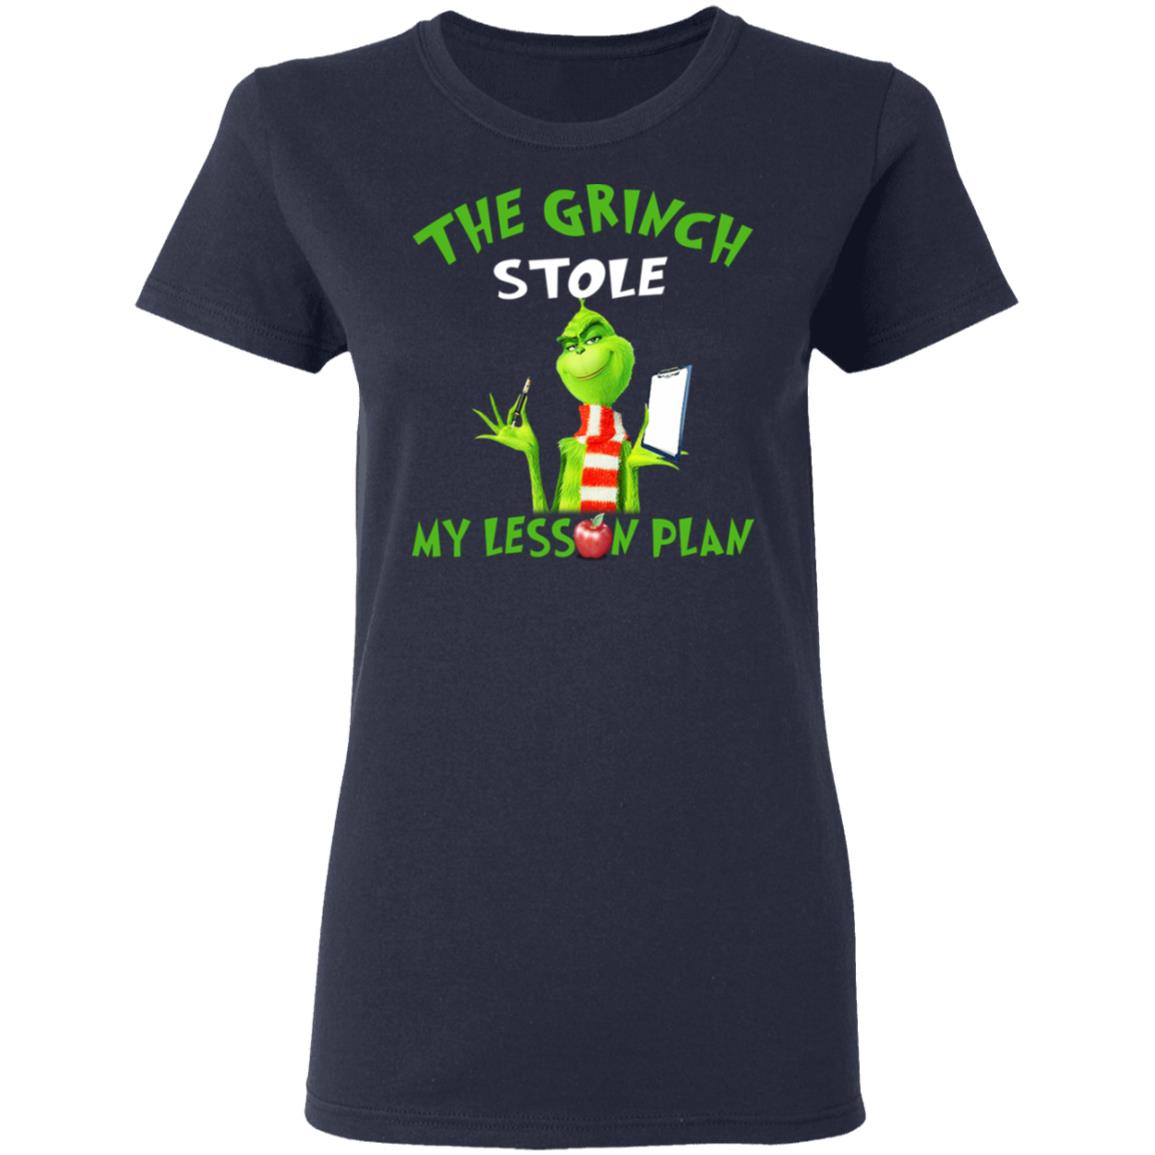 The Grinch Stole My Lesson Plan Shirt - TeeMoonley – Cool T-Shirts